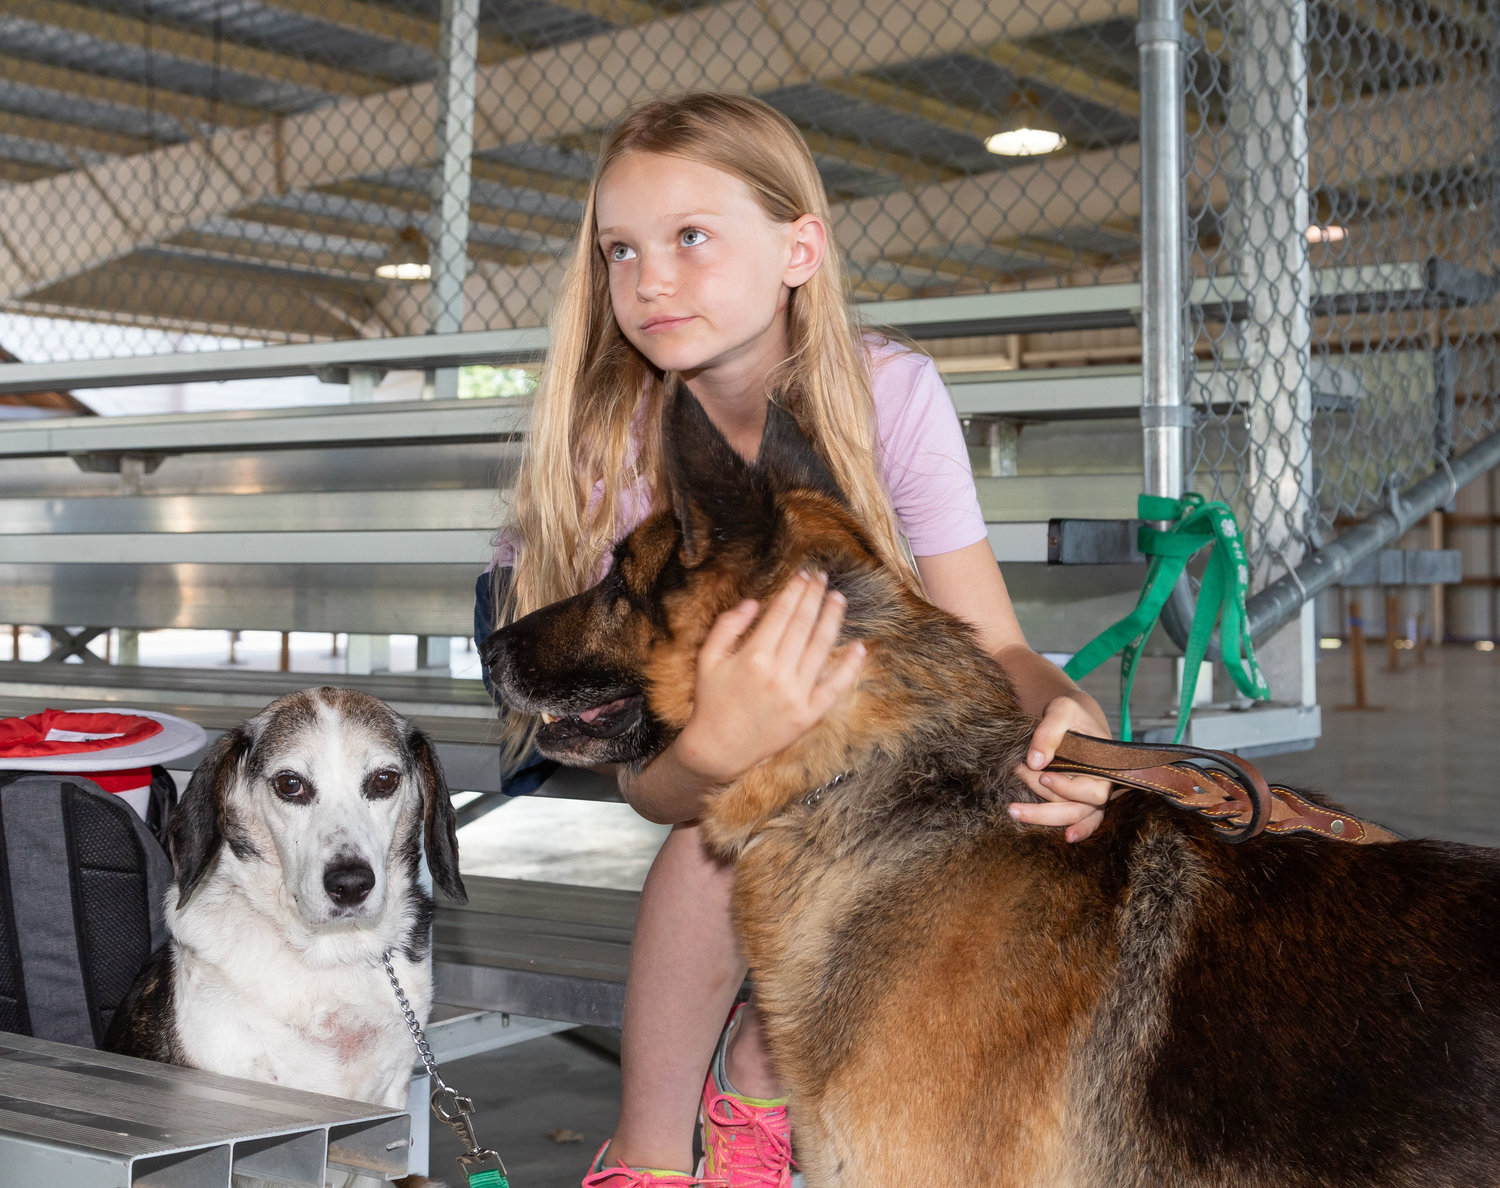 Paisley Weldon, of Atlanta, waits for the Randolph County Fair dog show with her beagle, Charlie, and German Shepherd, Teddy. Weldon was one of eight 4-H exhibitors showing their canines at Riley Pavilion in Moberly’s Rothwell Park Sunday. The fair continues through Saturday.